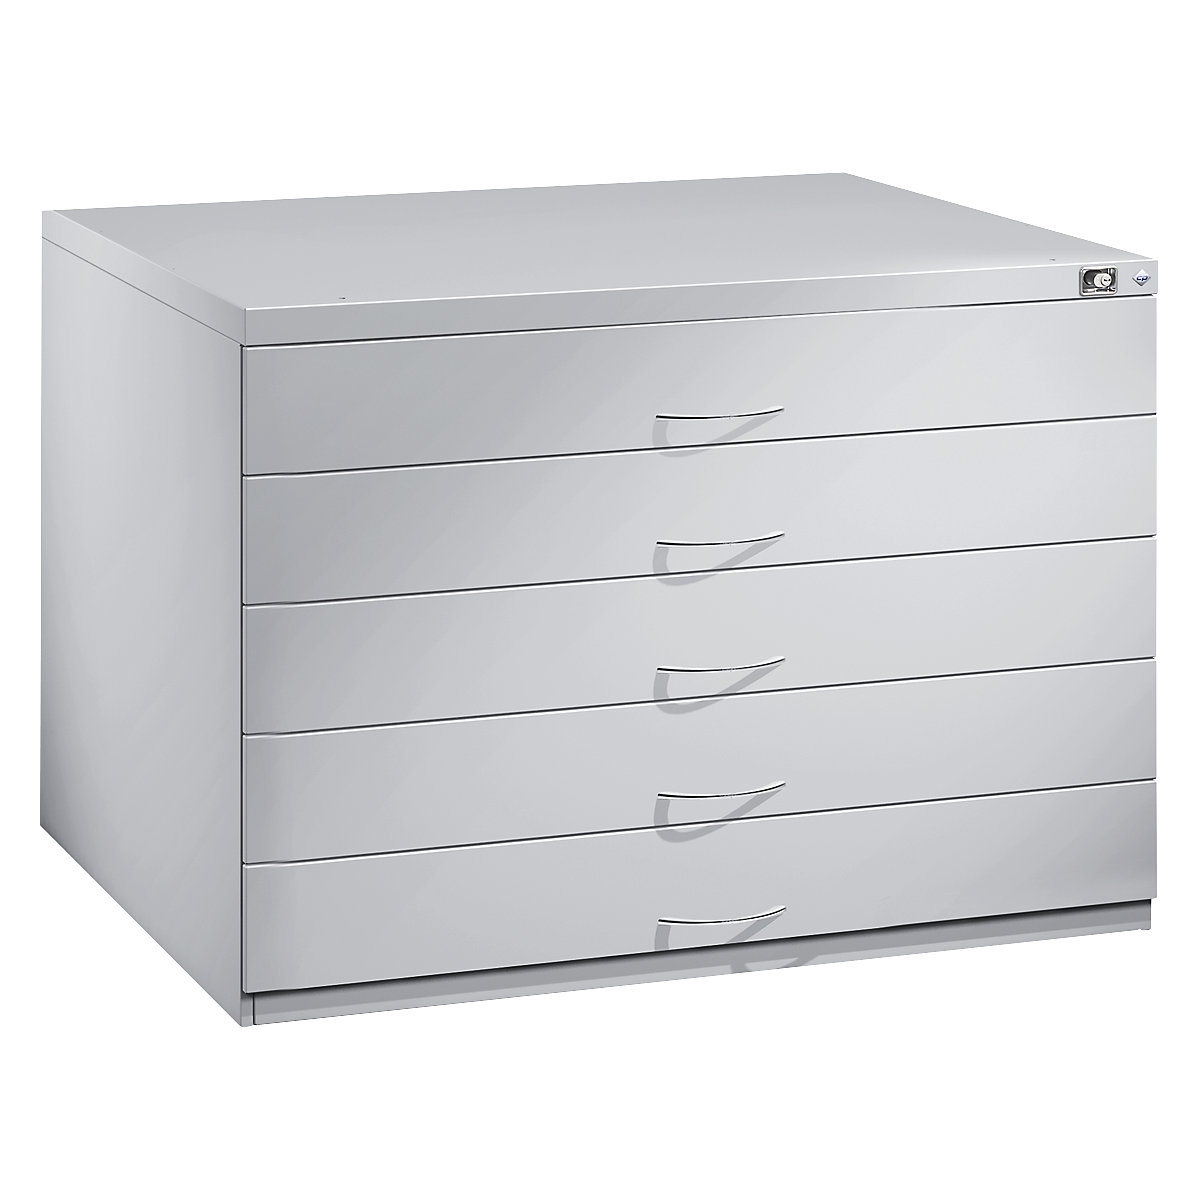 Drawing cabinet – C+P, A0, 10 drawers, height 760 mm, light grey-14